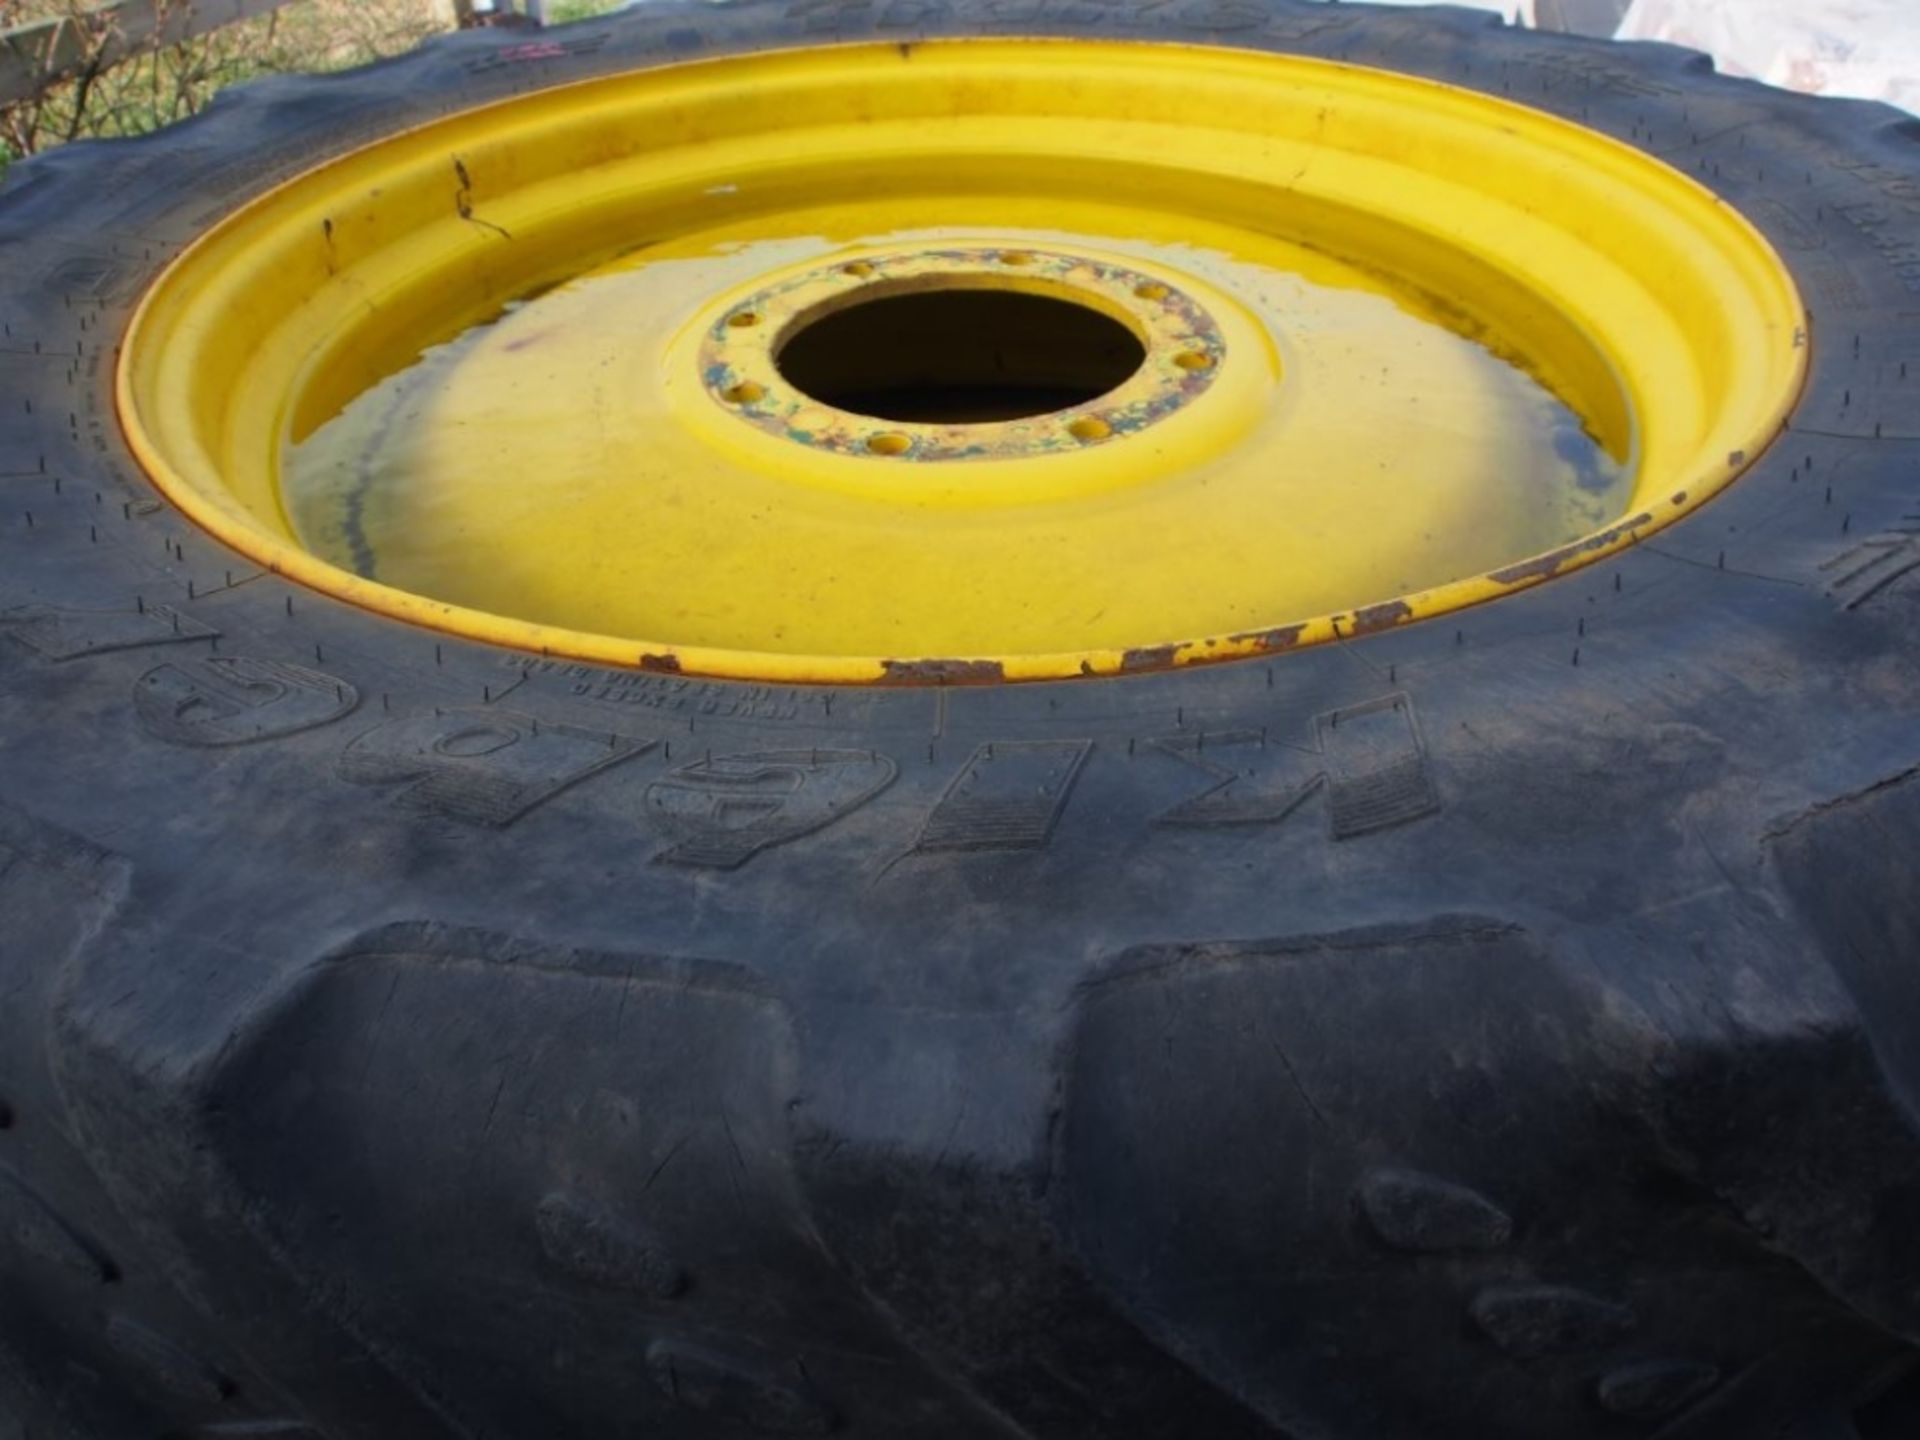 Set of Row crop wheels and tyres ex John 6430 from 320/82-32 Kleber Rear 340/85-46 Michelin - Image 2 of 2